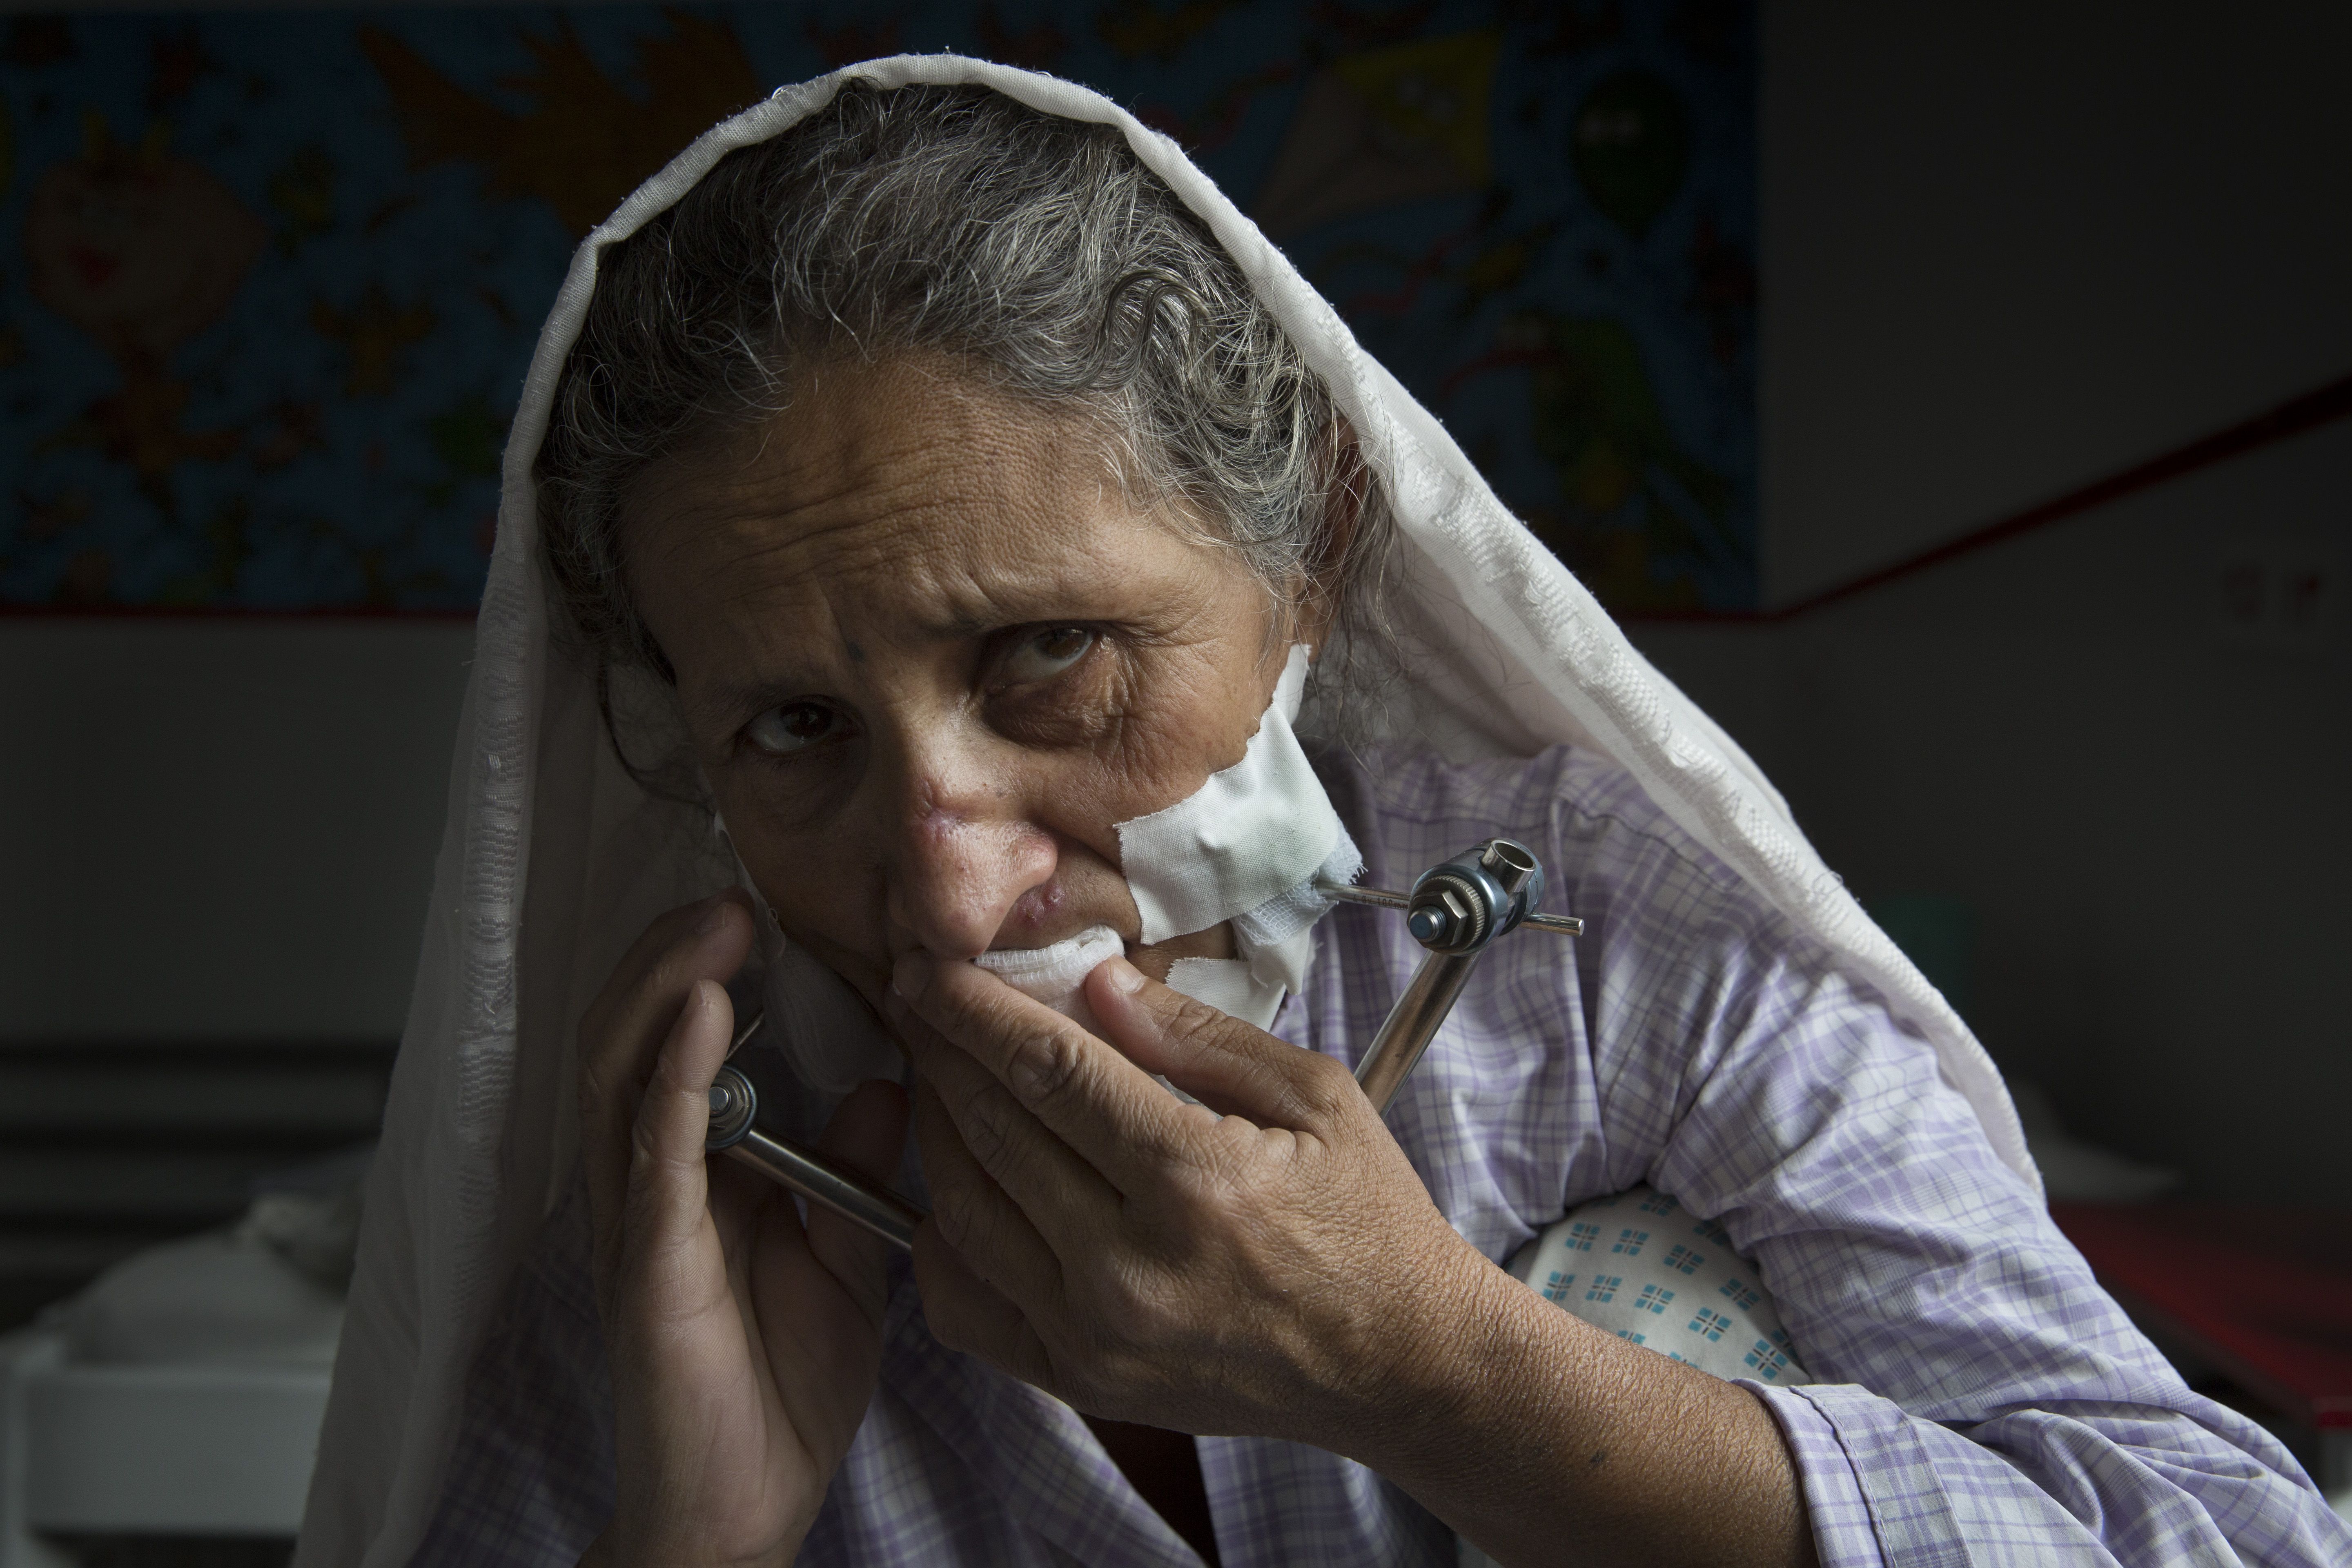 Aman Gull received a painful bullet wound to her face during a fight between police and Taliban members. Image by Paula Bronstein. Afghanistan, 2015. 